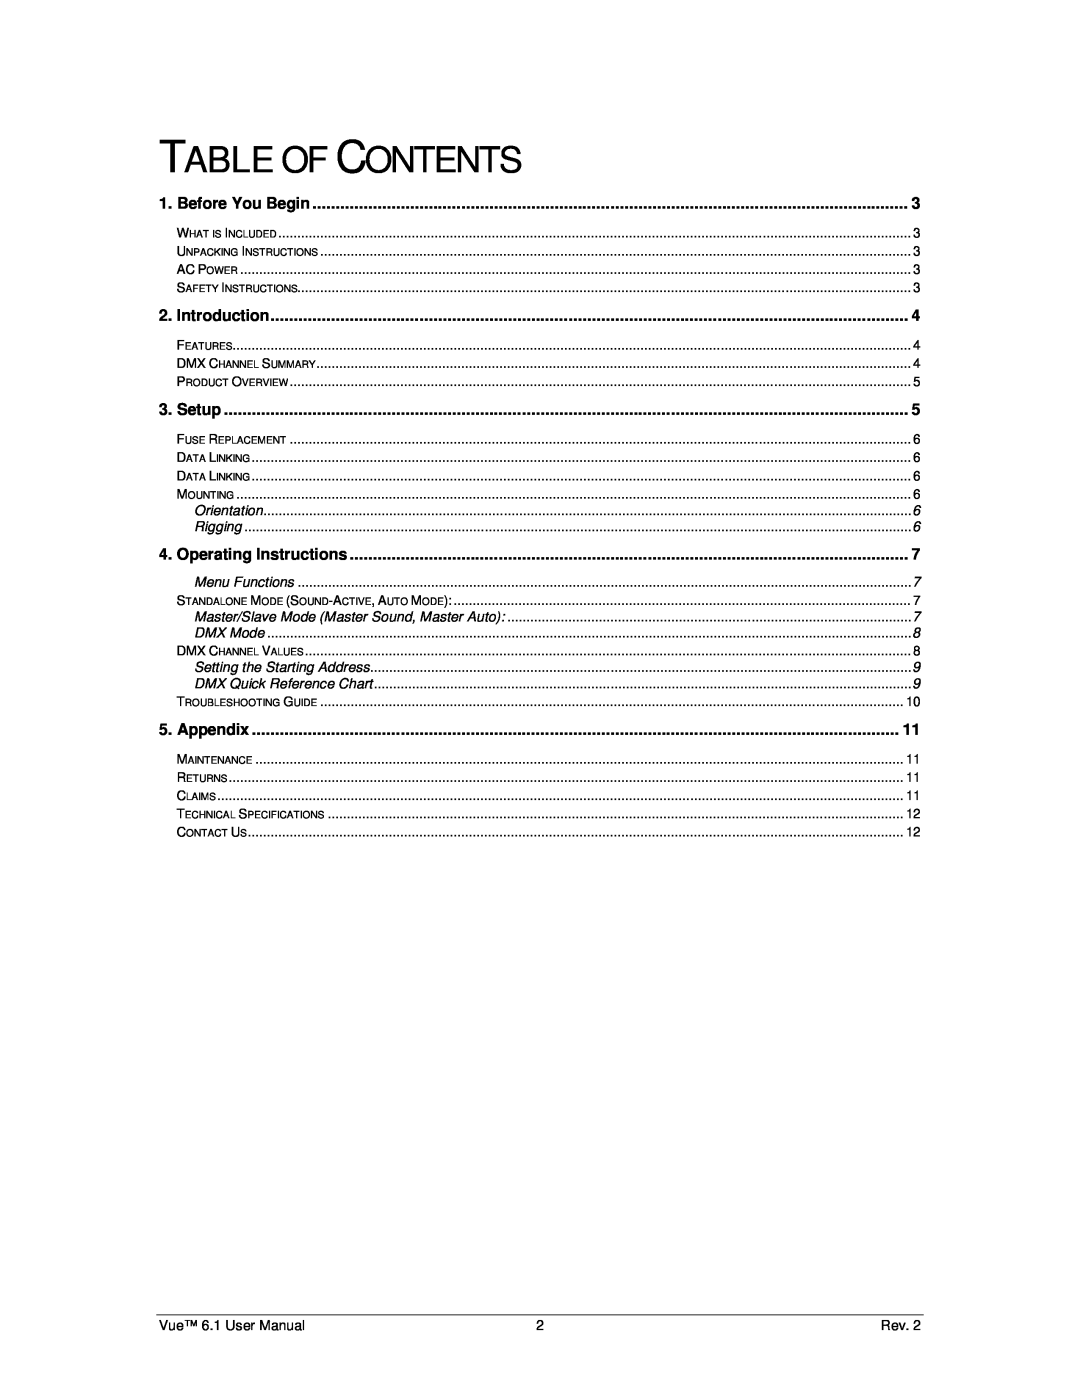 Chauvet 6.1 user manual Table Of Contents, Before You Begin, Introduction, Setup, Operating Instructions, Appendix 